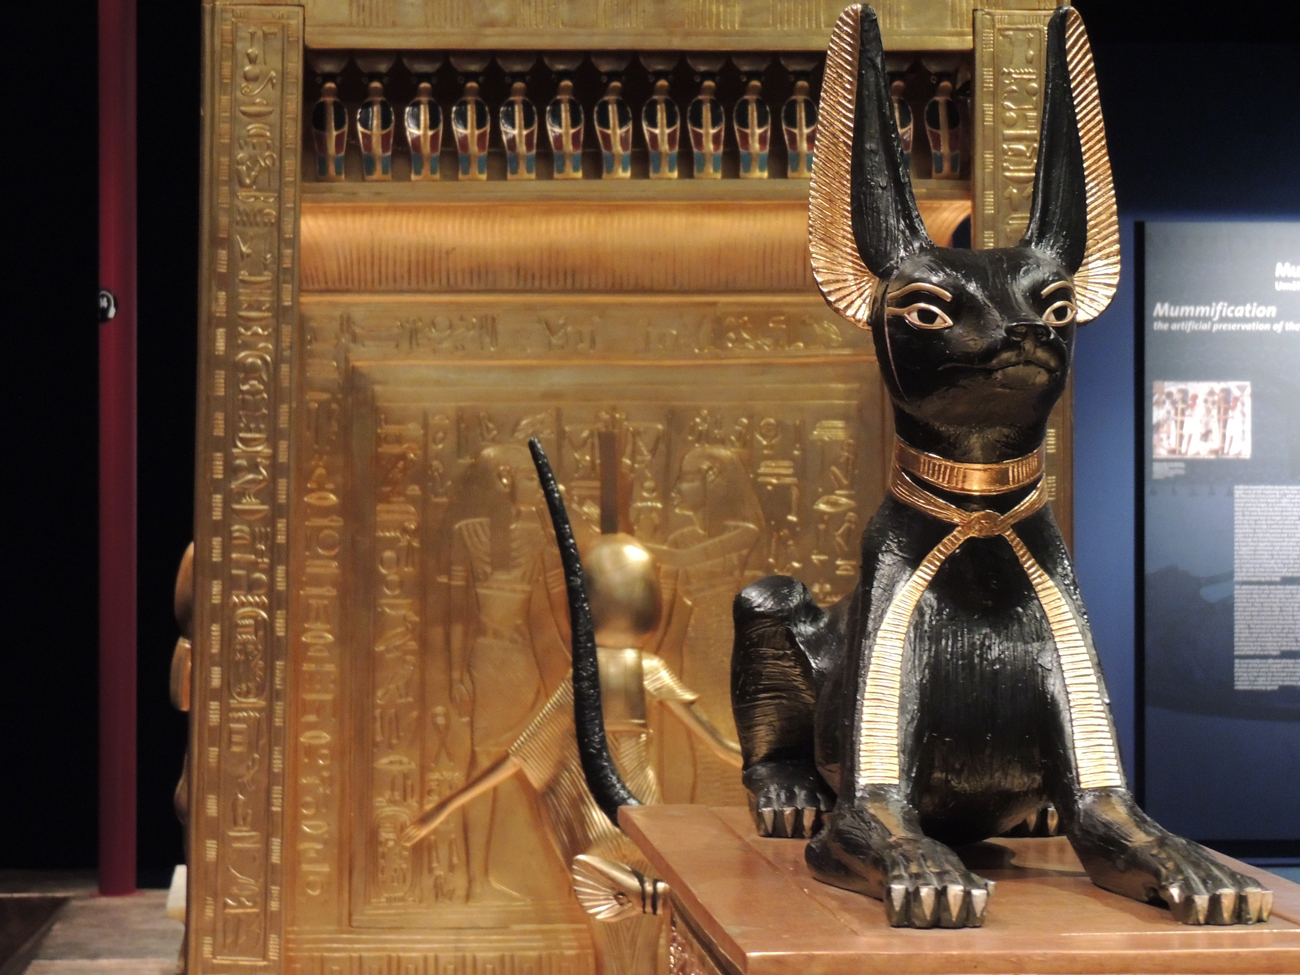 A statue of a cat in an ancient Egypt museum display